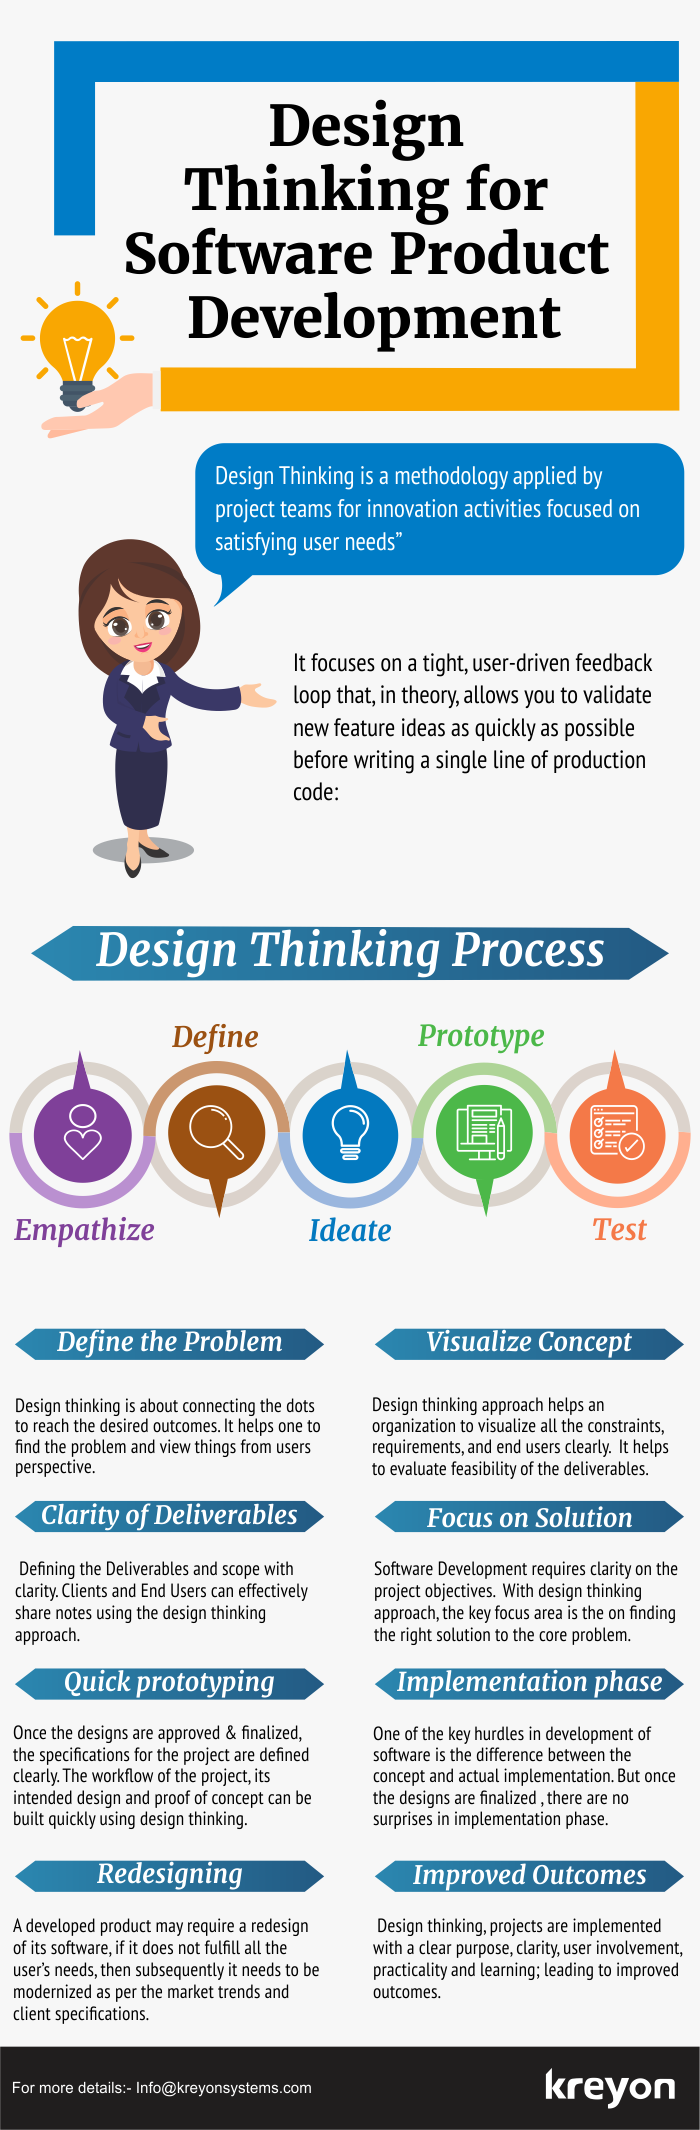 design-thinking-for-software-product